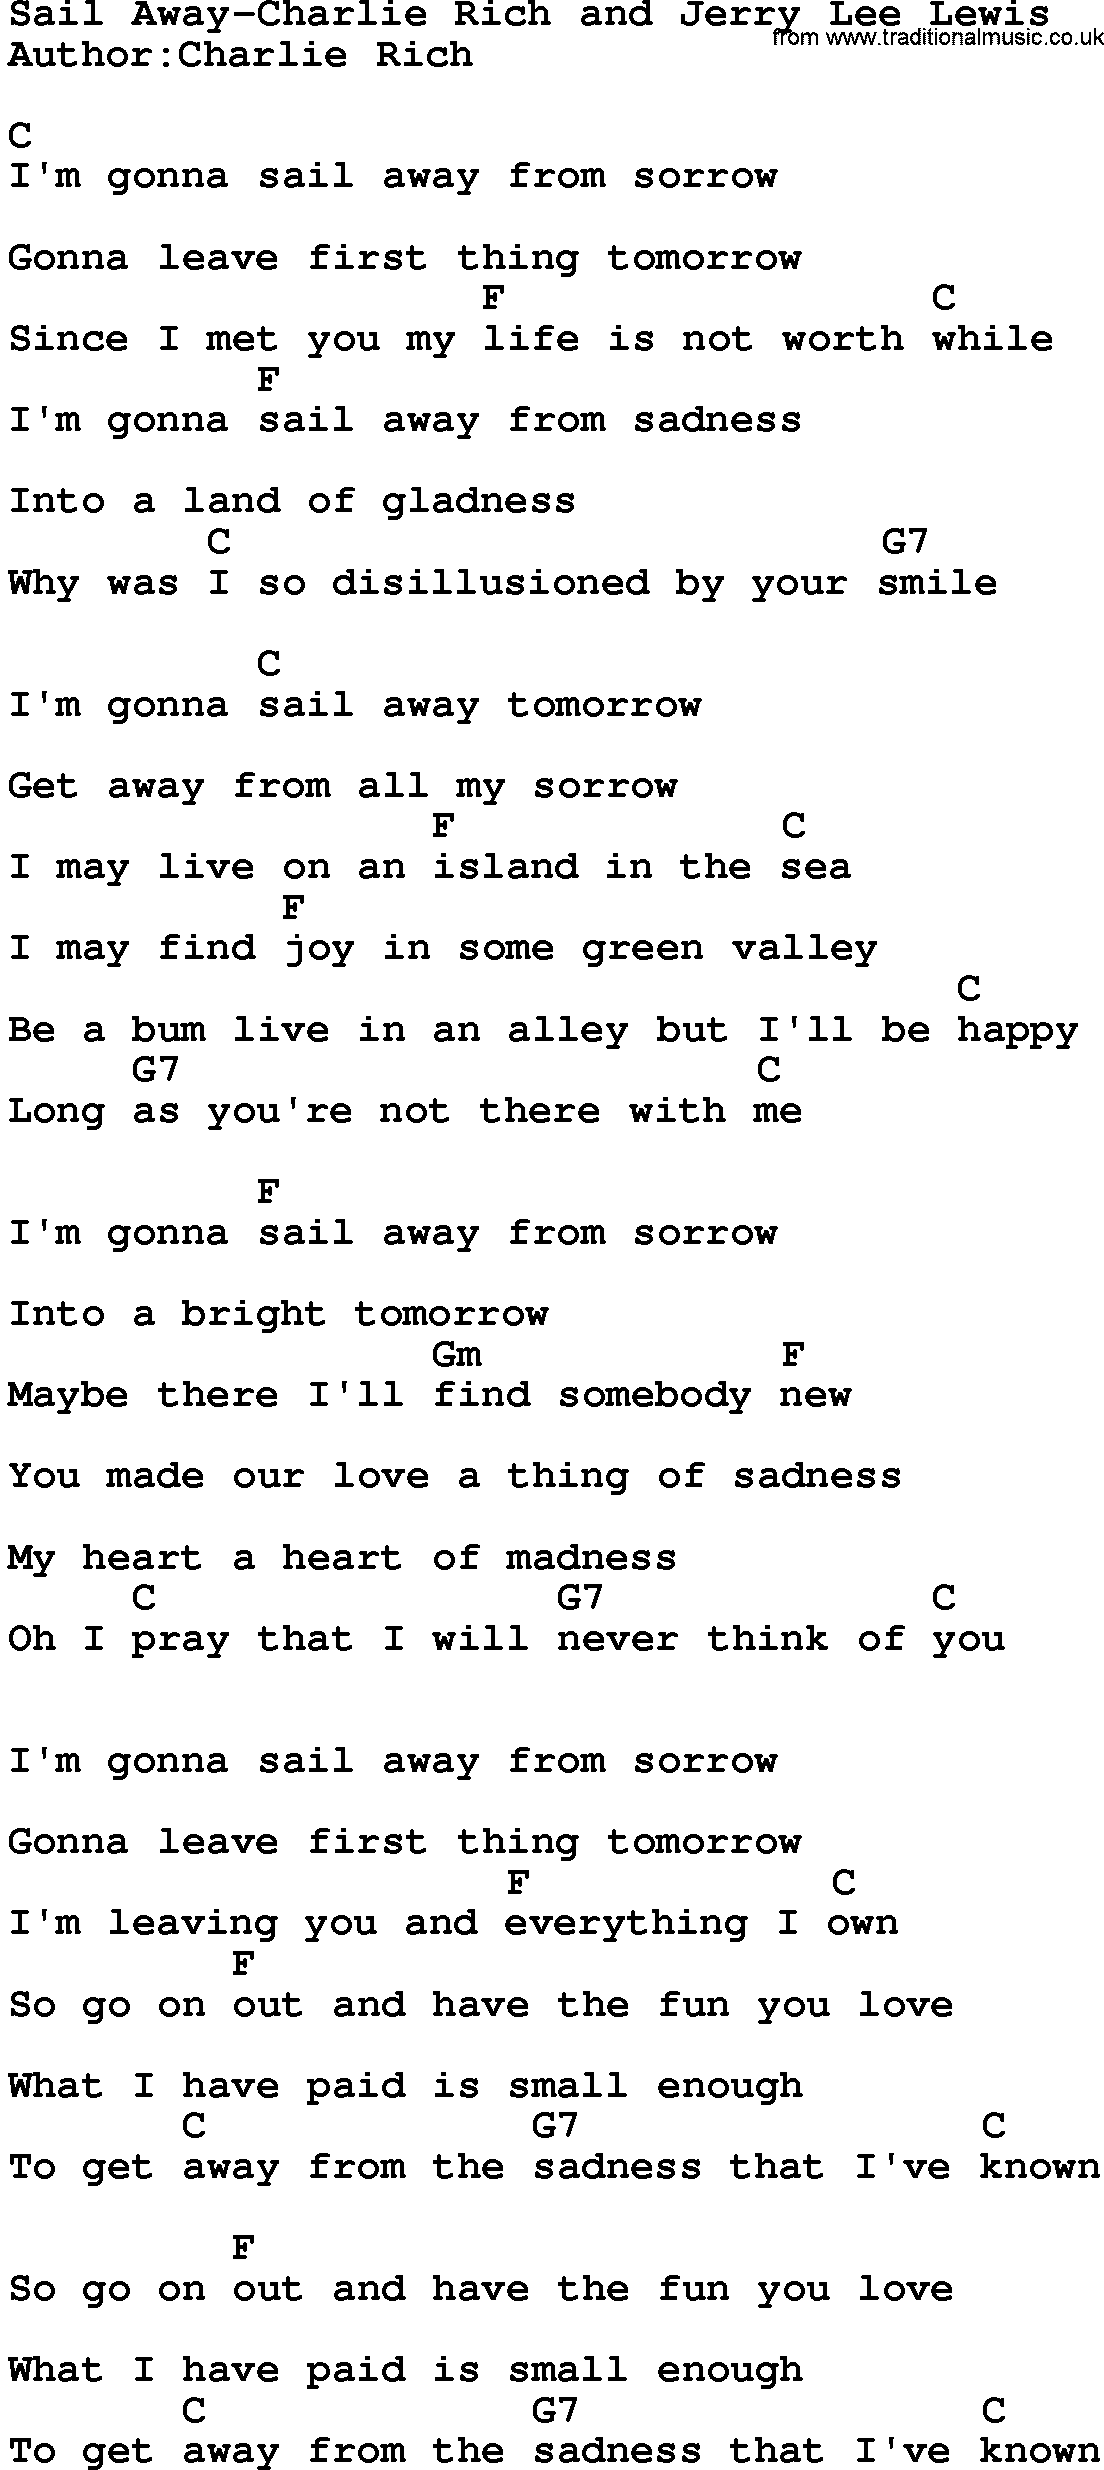 Country music song: Sail Away-Charlie Rich And Jerry Lee Lewis lyrics and chords